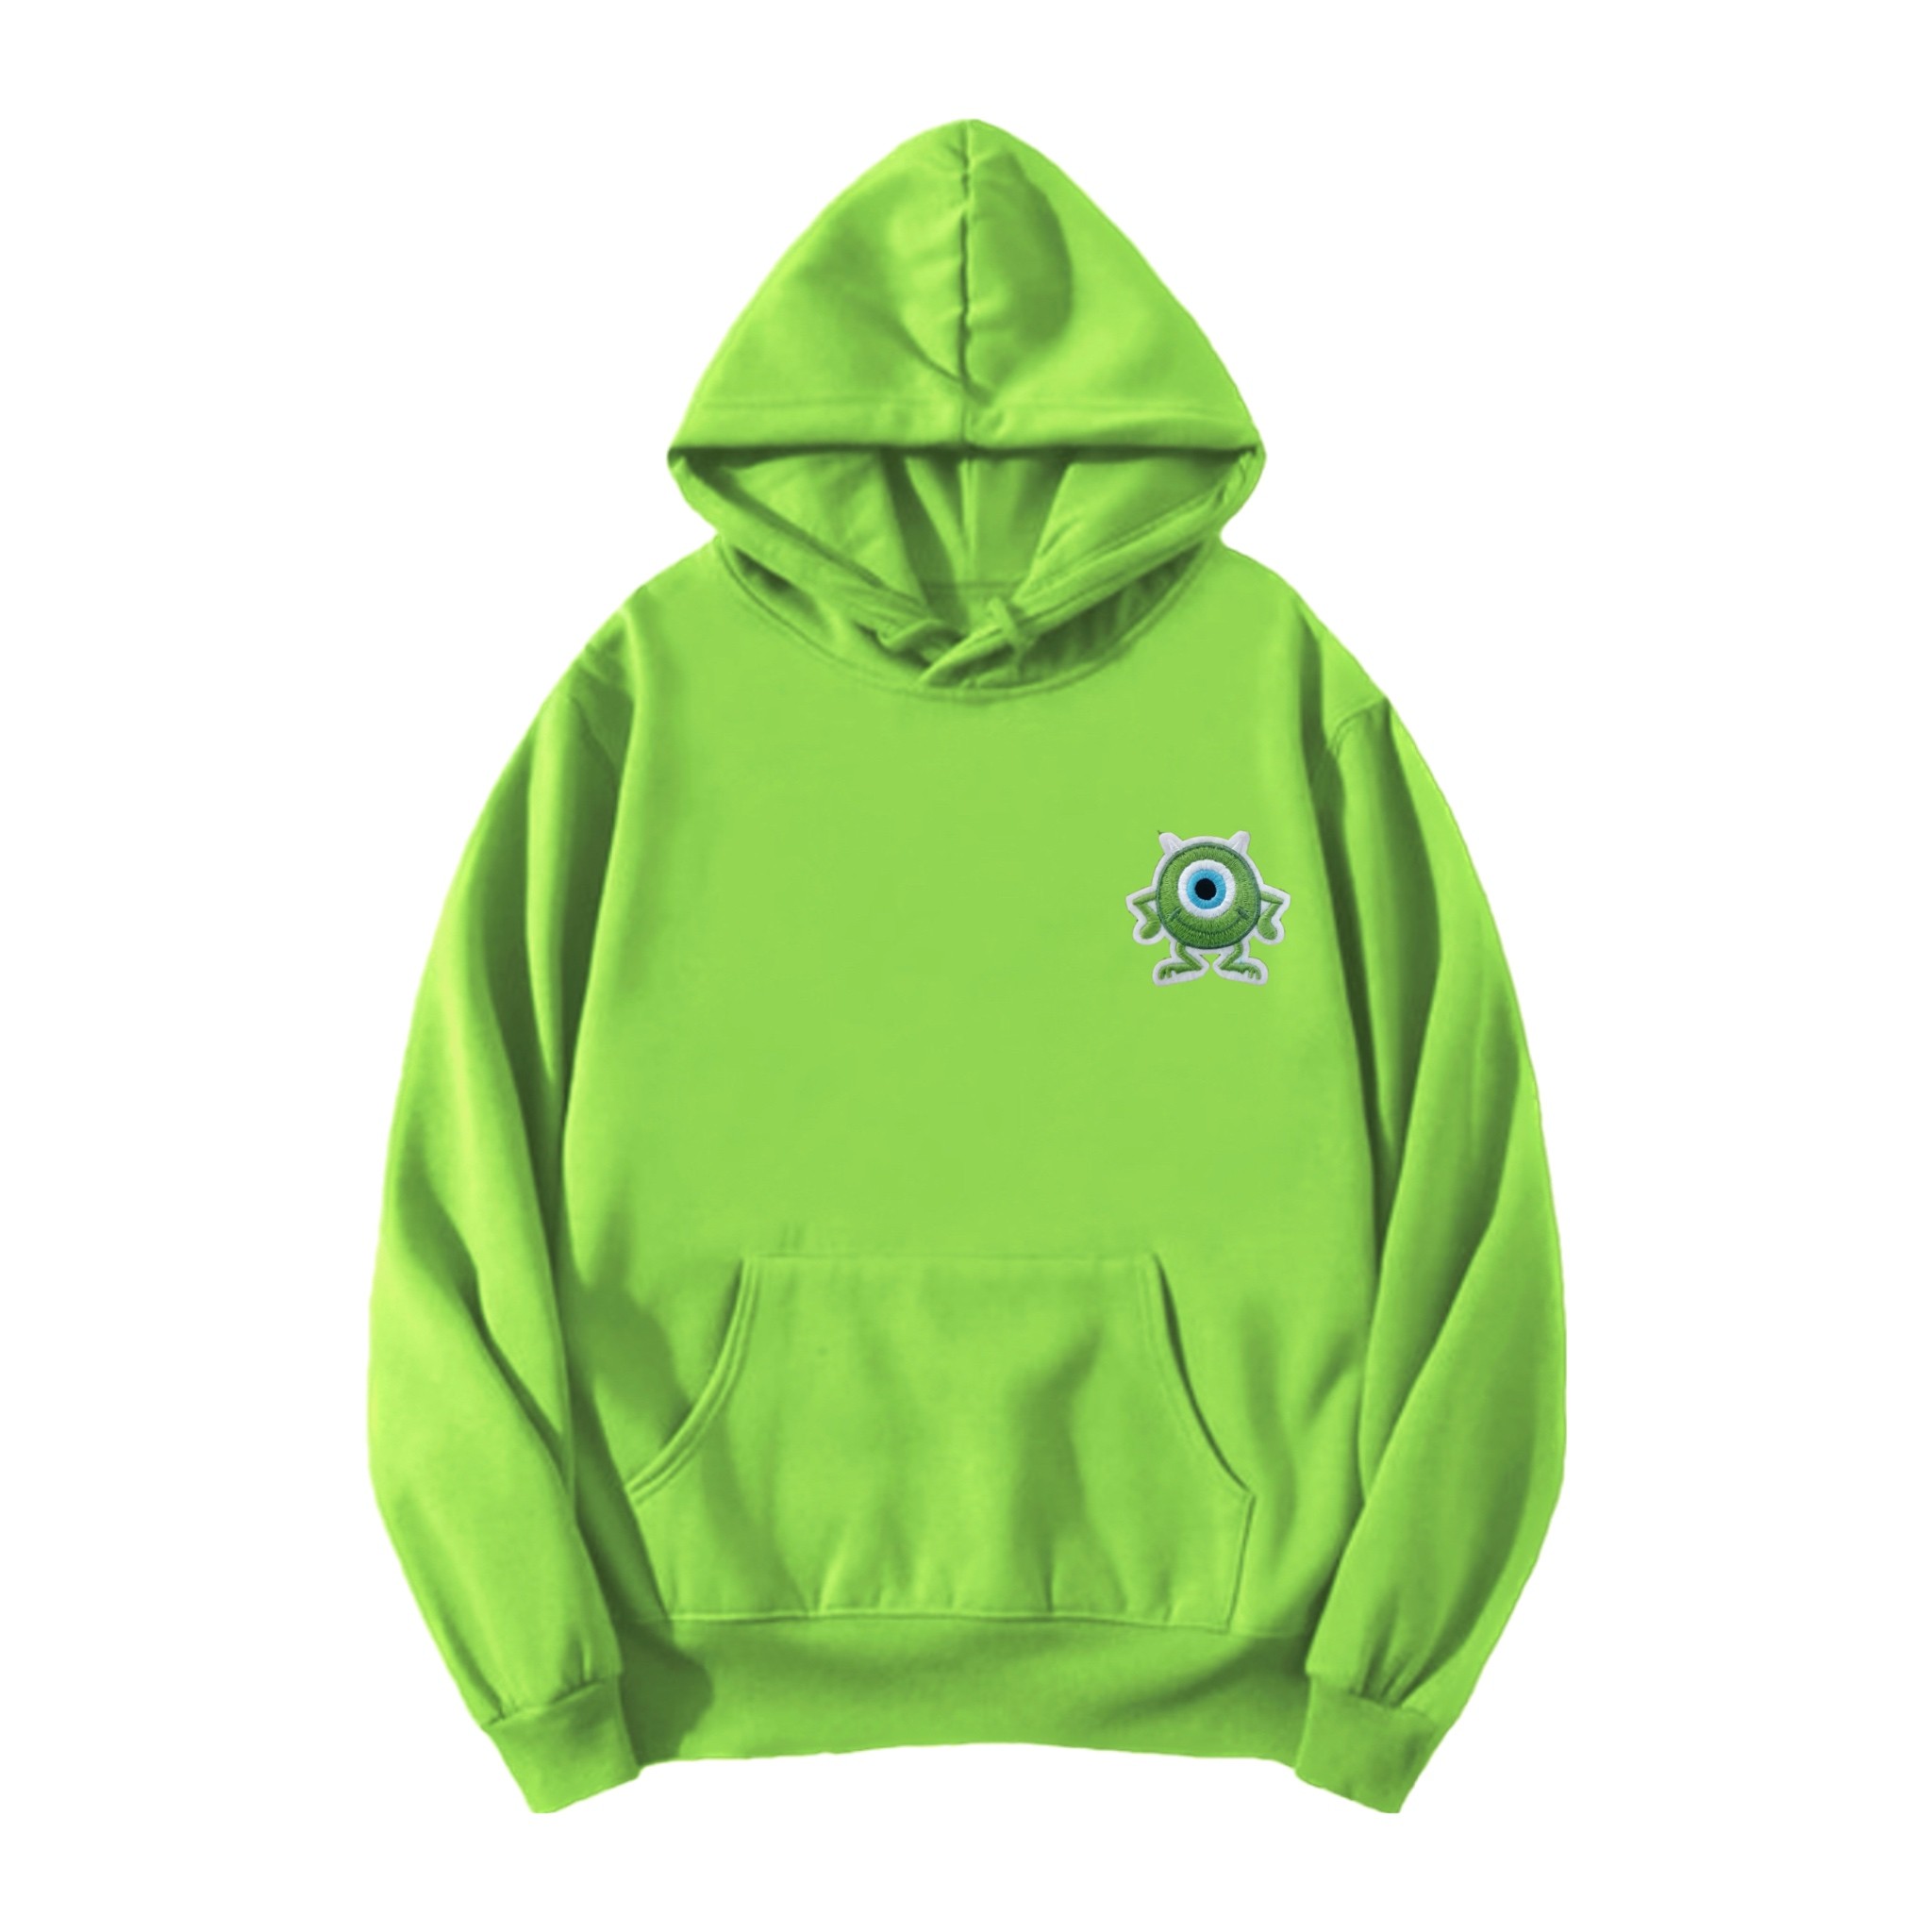 MIKE patched regular fit lime green hoodie 